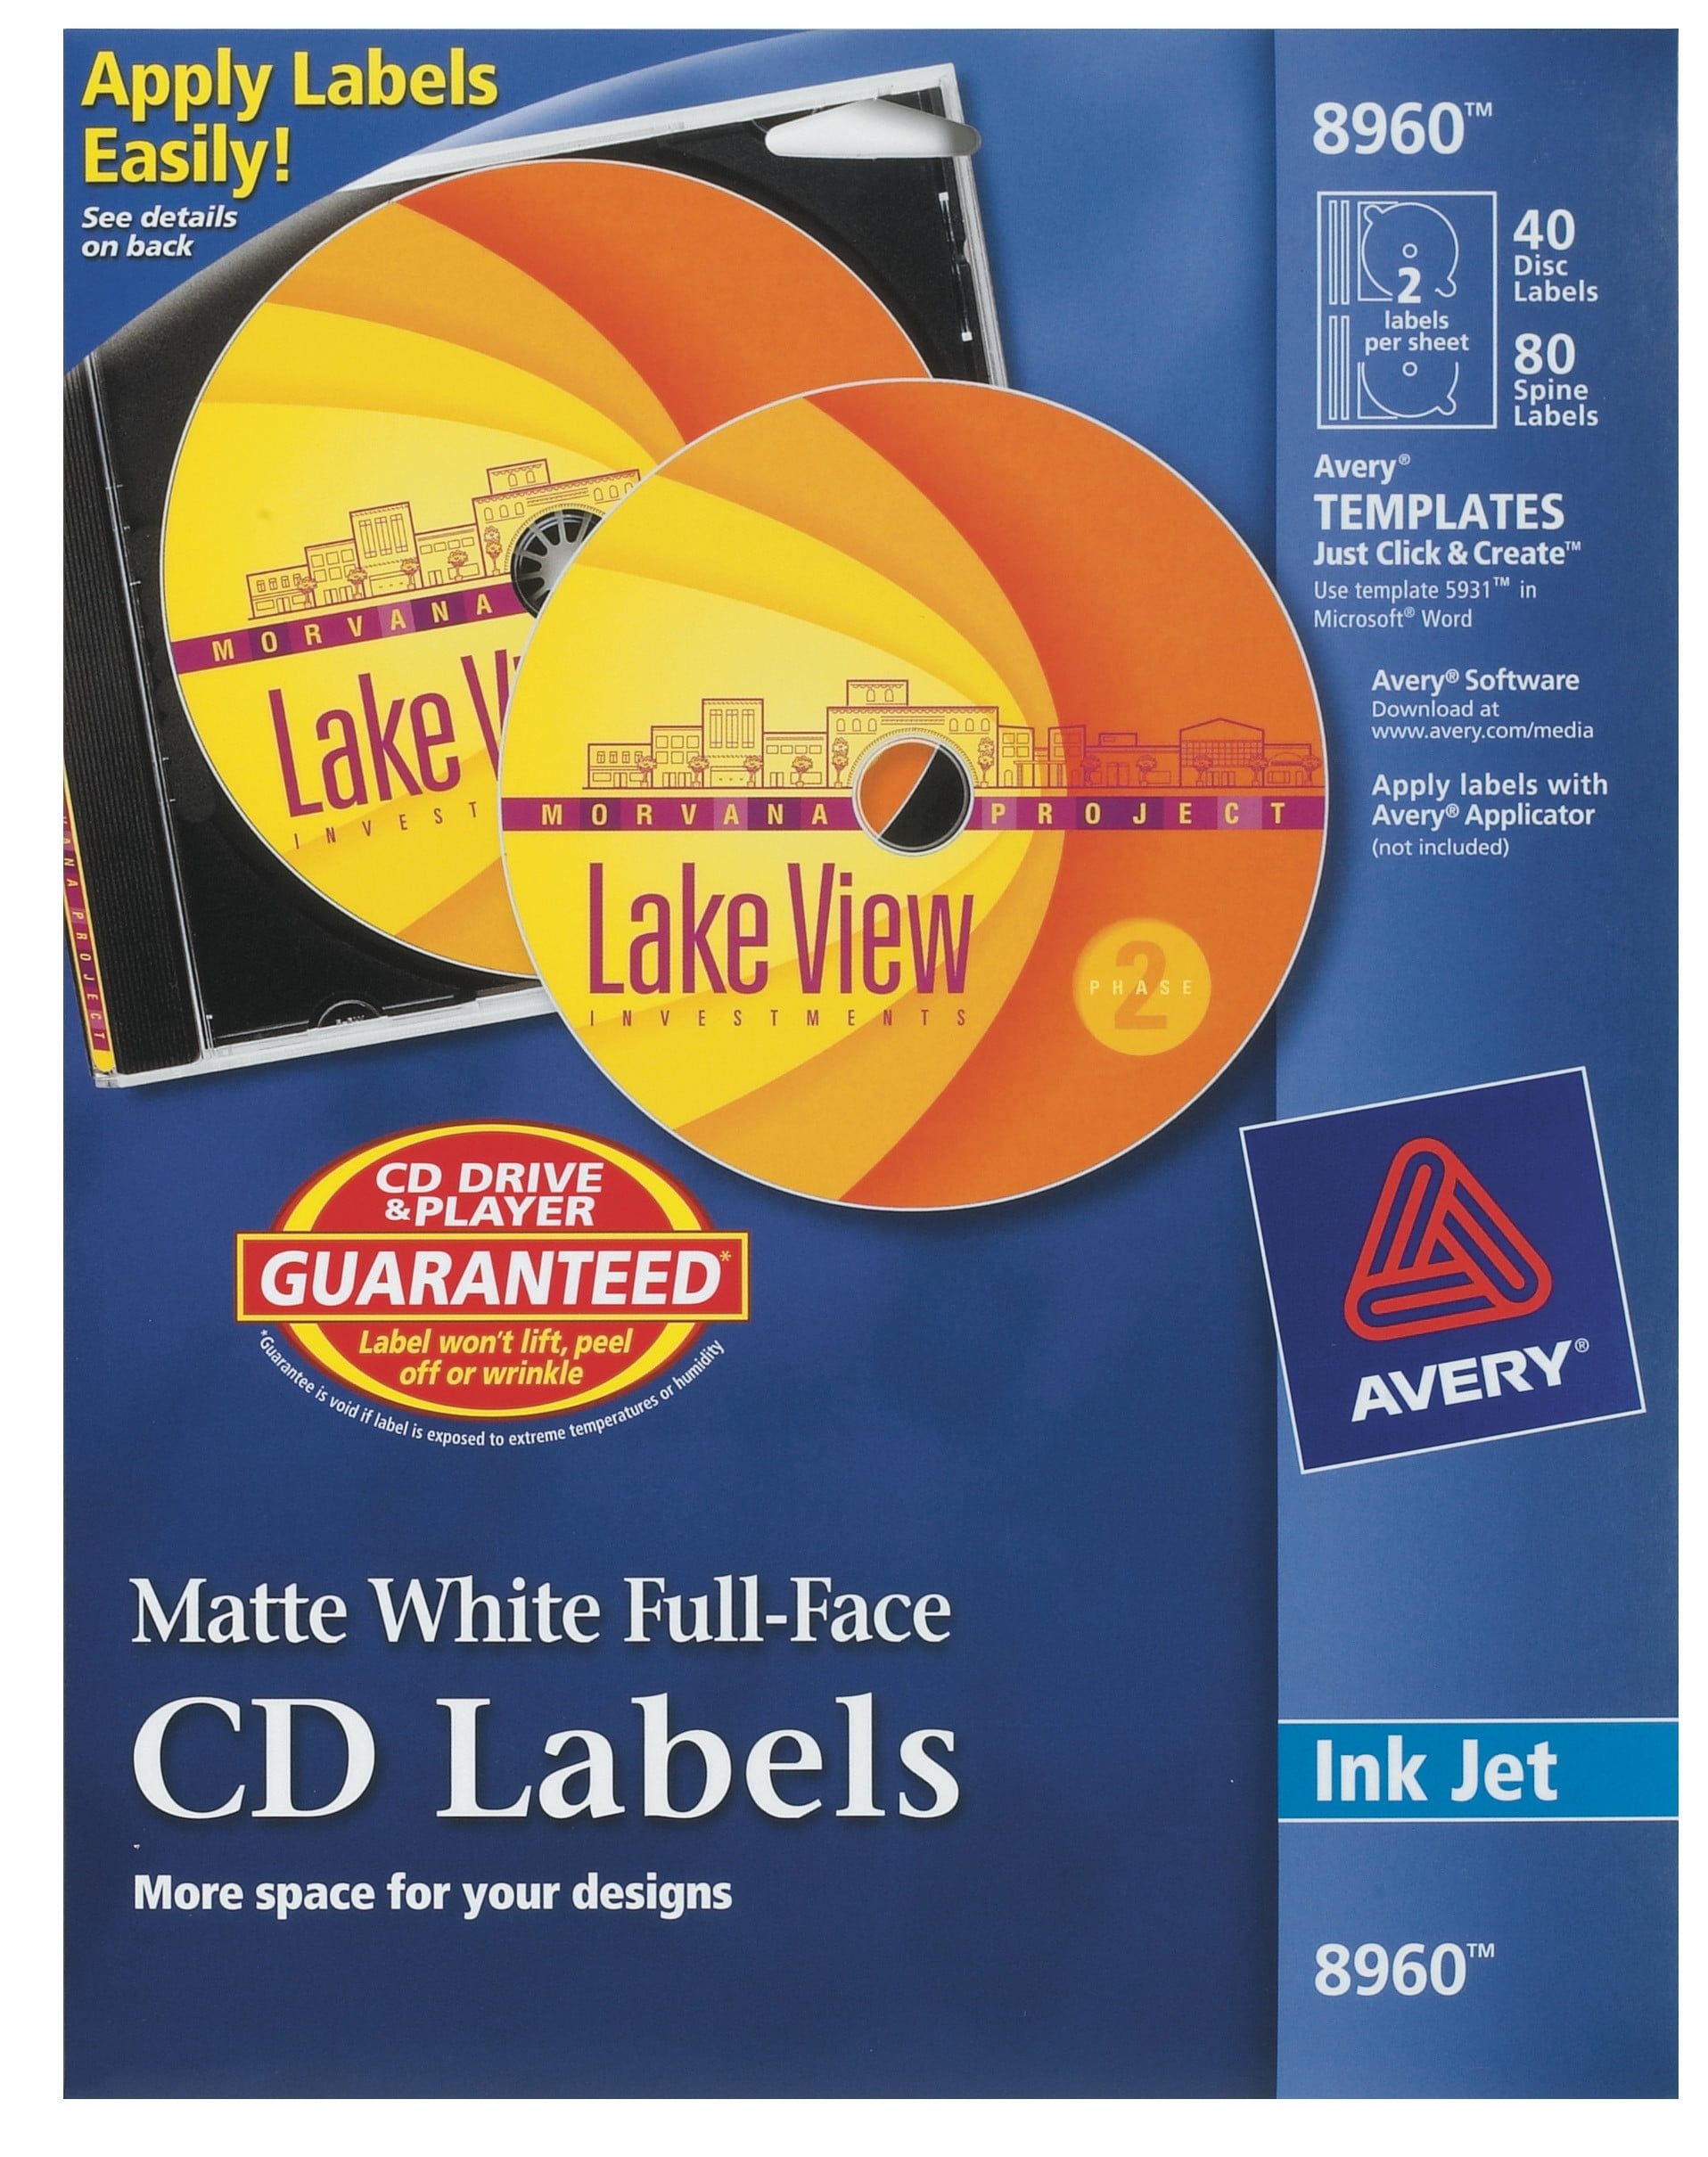 Avery CD Labels, Print to the Edge, Permanent Adhesive, Matte, 40 Labels and Spine (8960) - Walmart.com